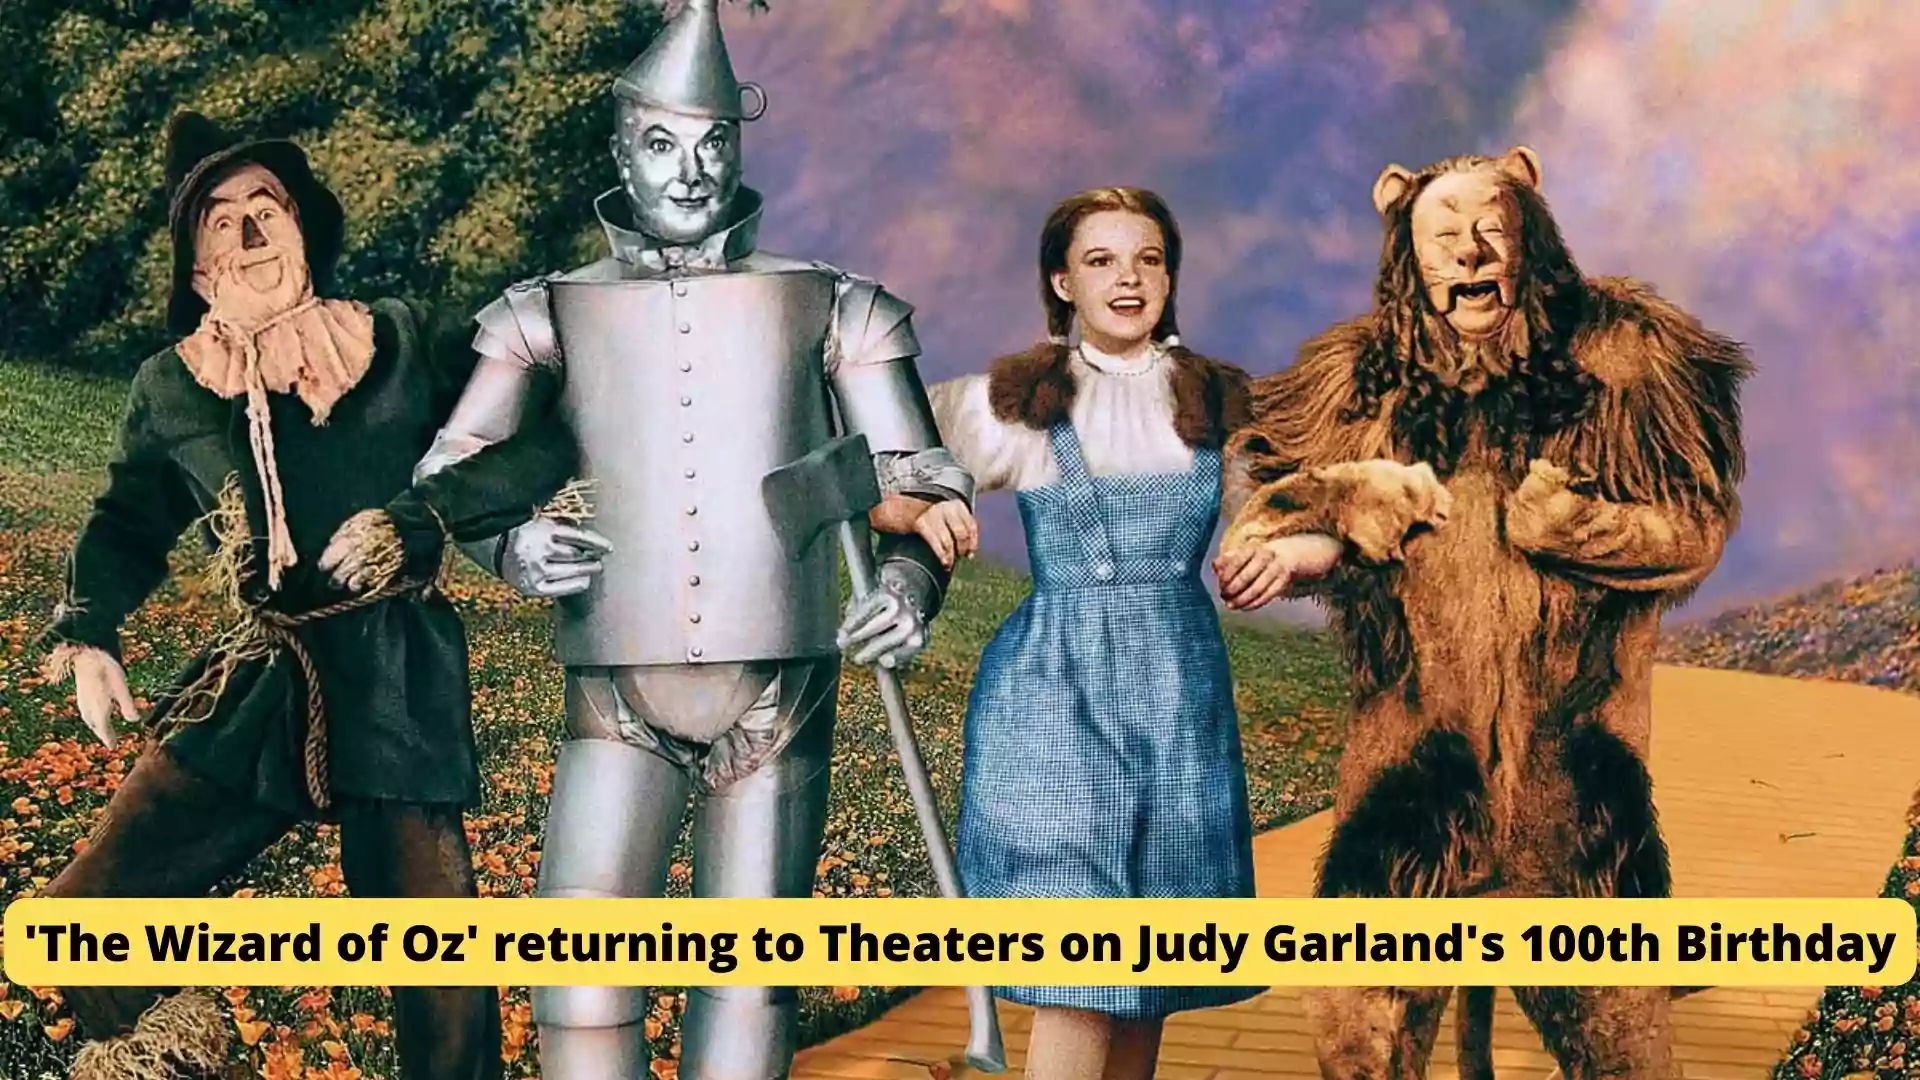 'The Wizard of Oz' returning to Theaters on Judy Garland's 100th Birthday